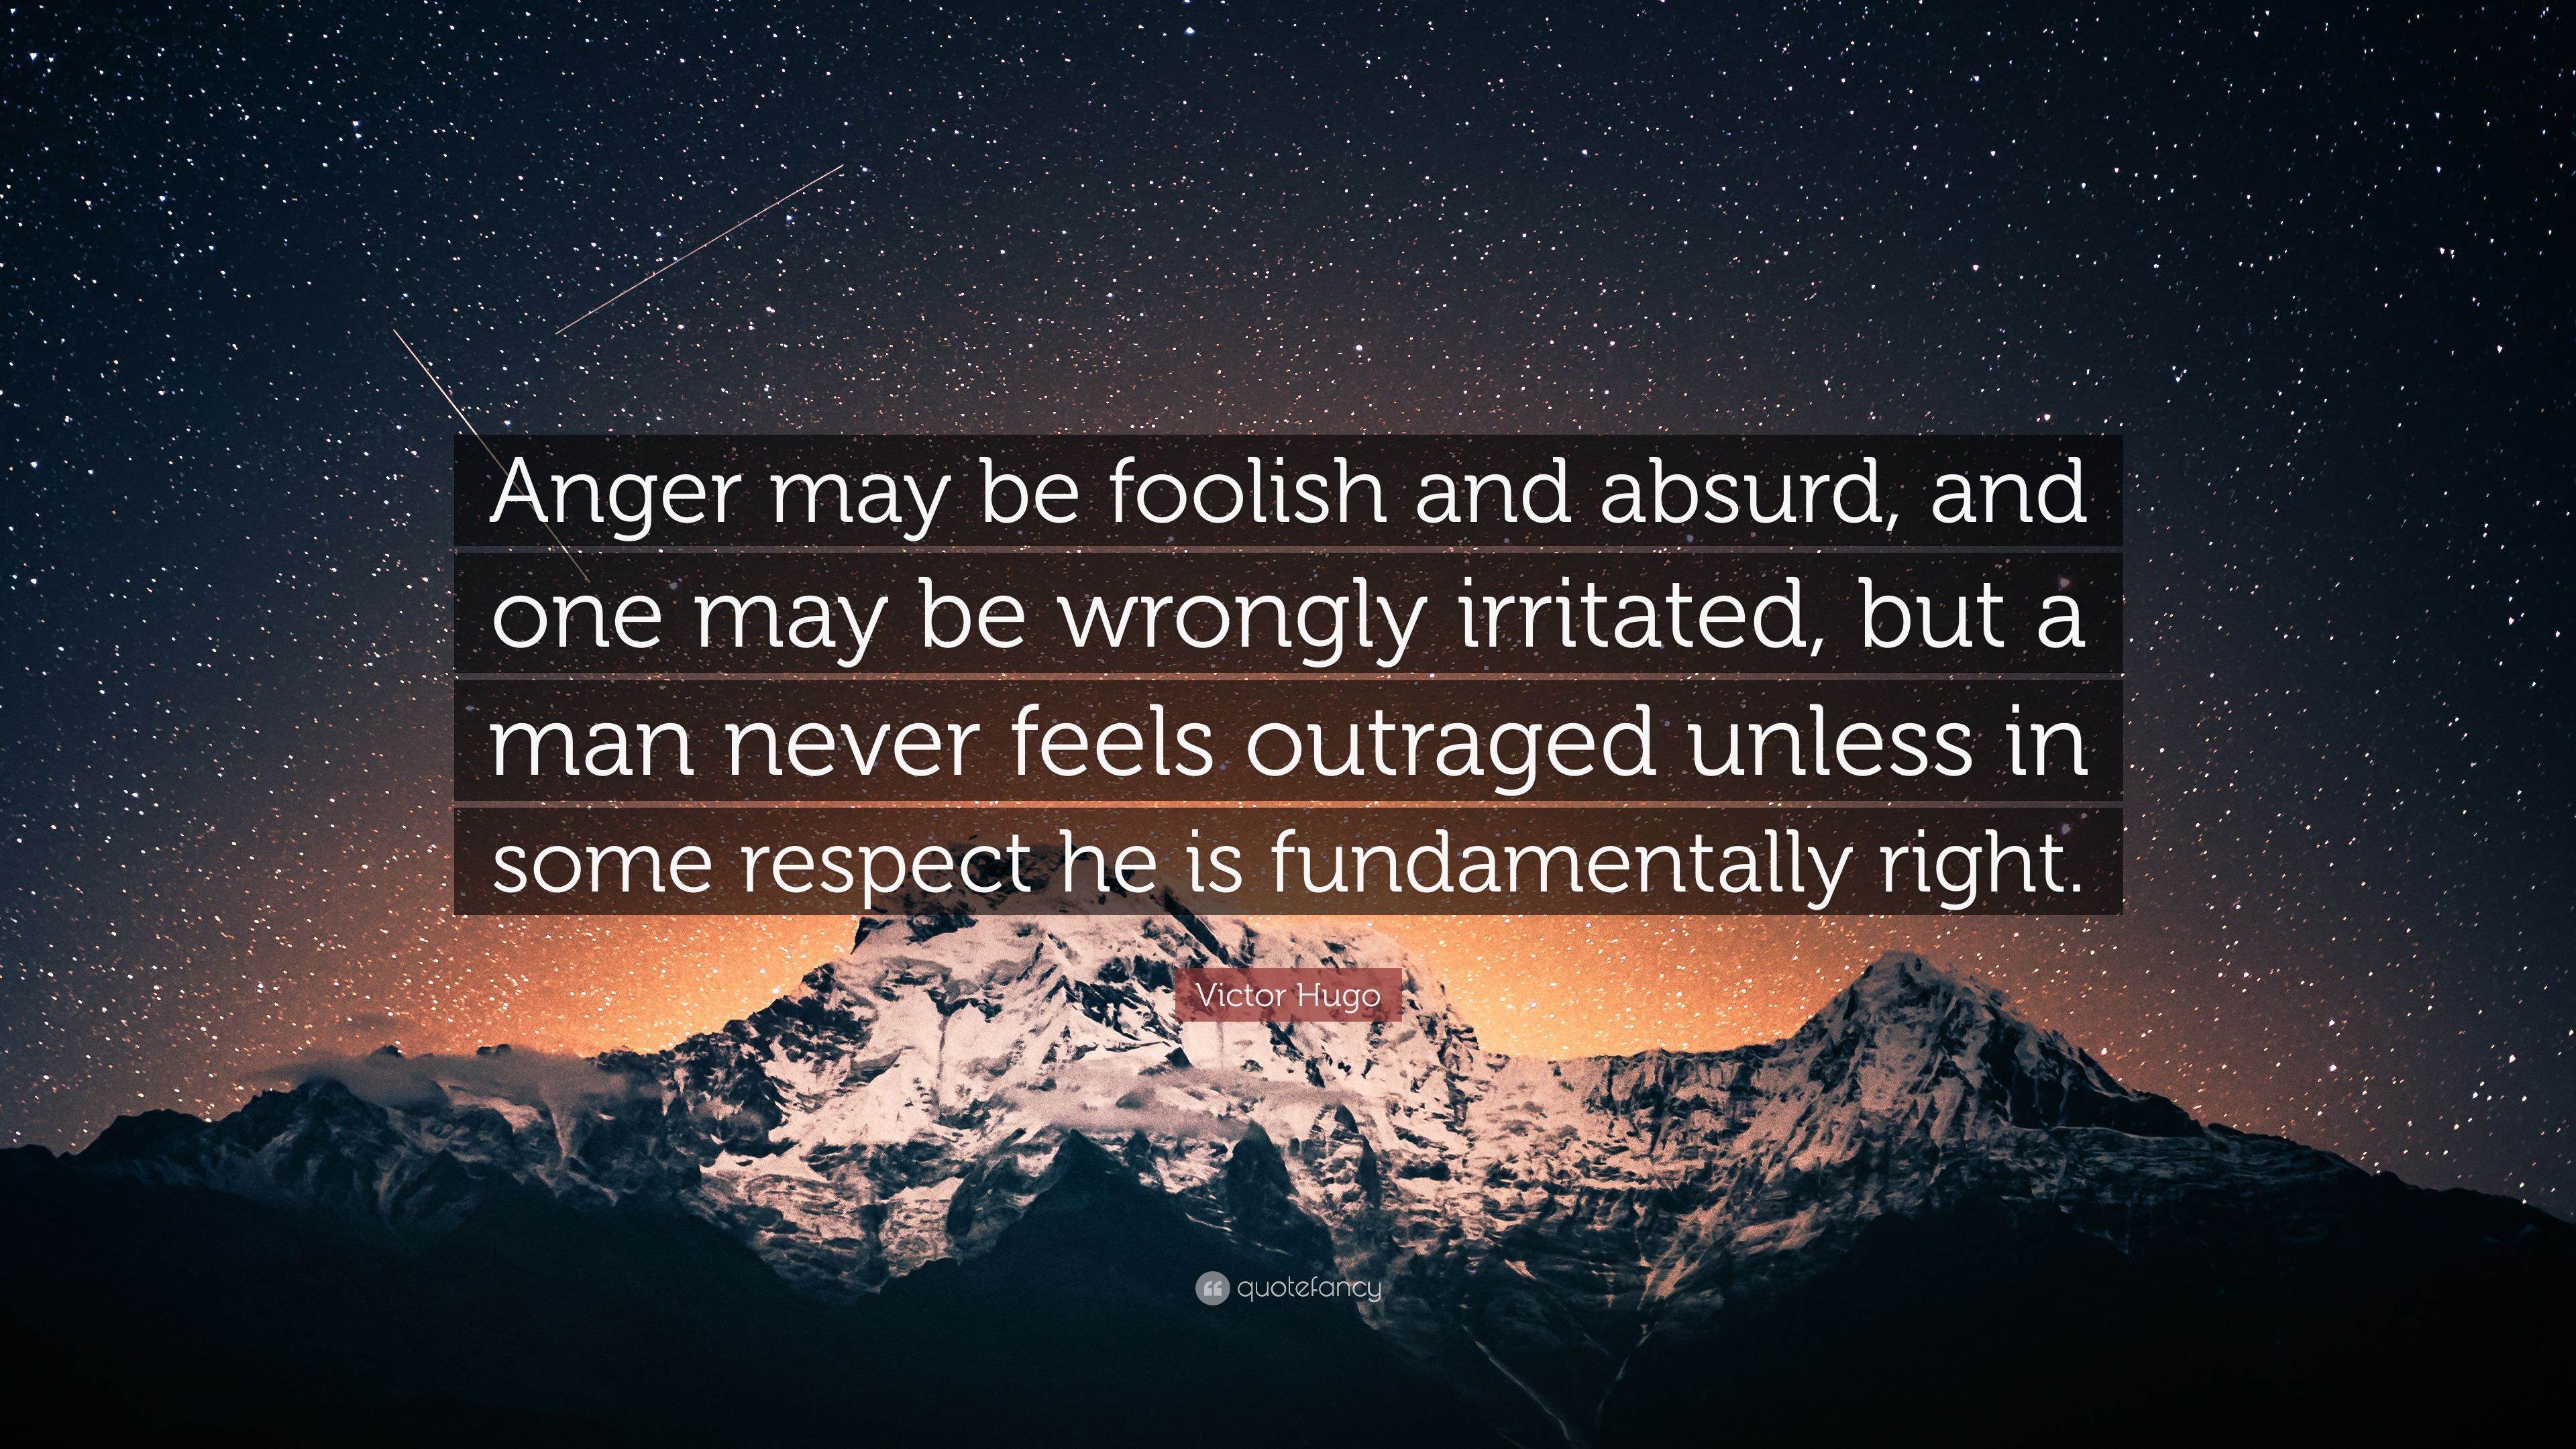 Victor Hugo Quote: “Anger may be foolish and absurd, and one may